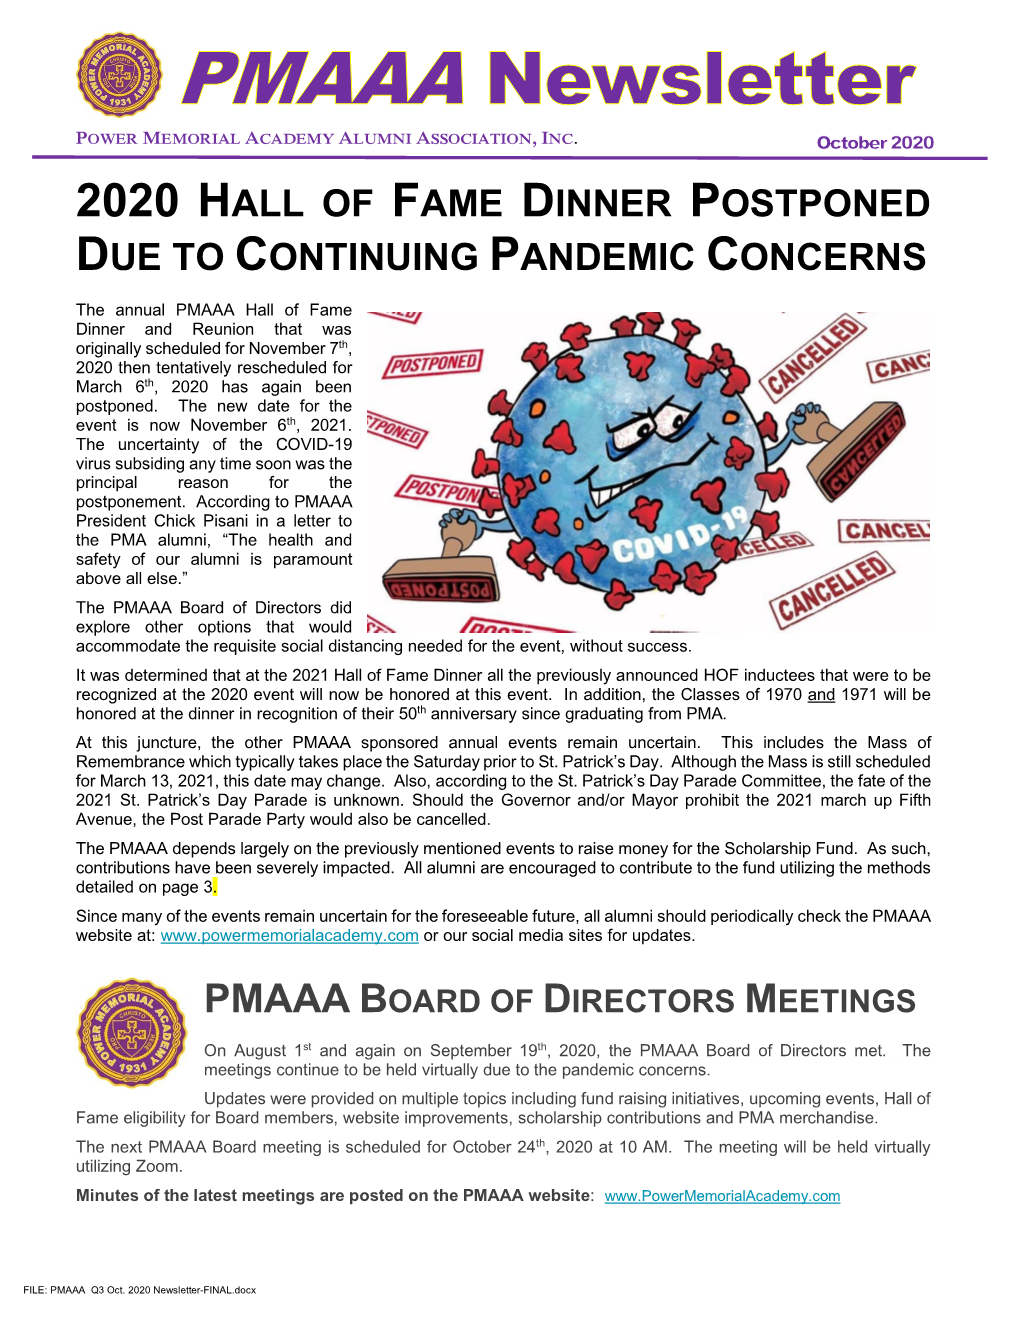 2020 Hall of Fame Dinner Postponed Due to Continuing Pandemic Concerns